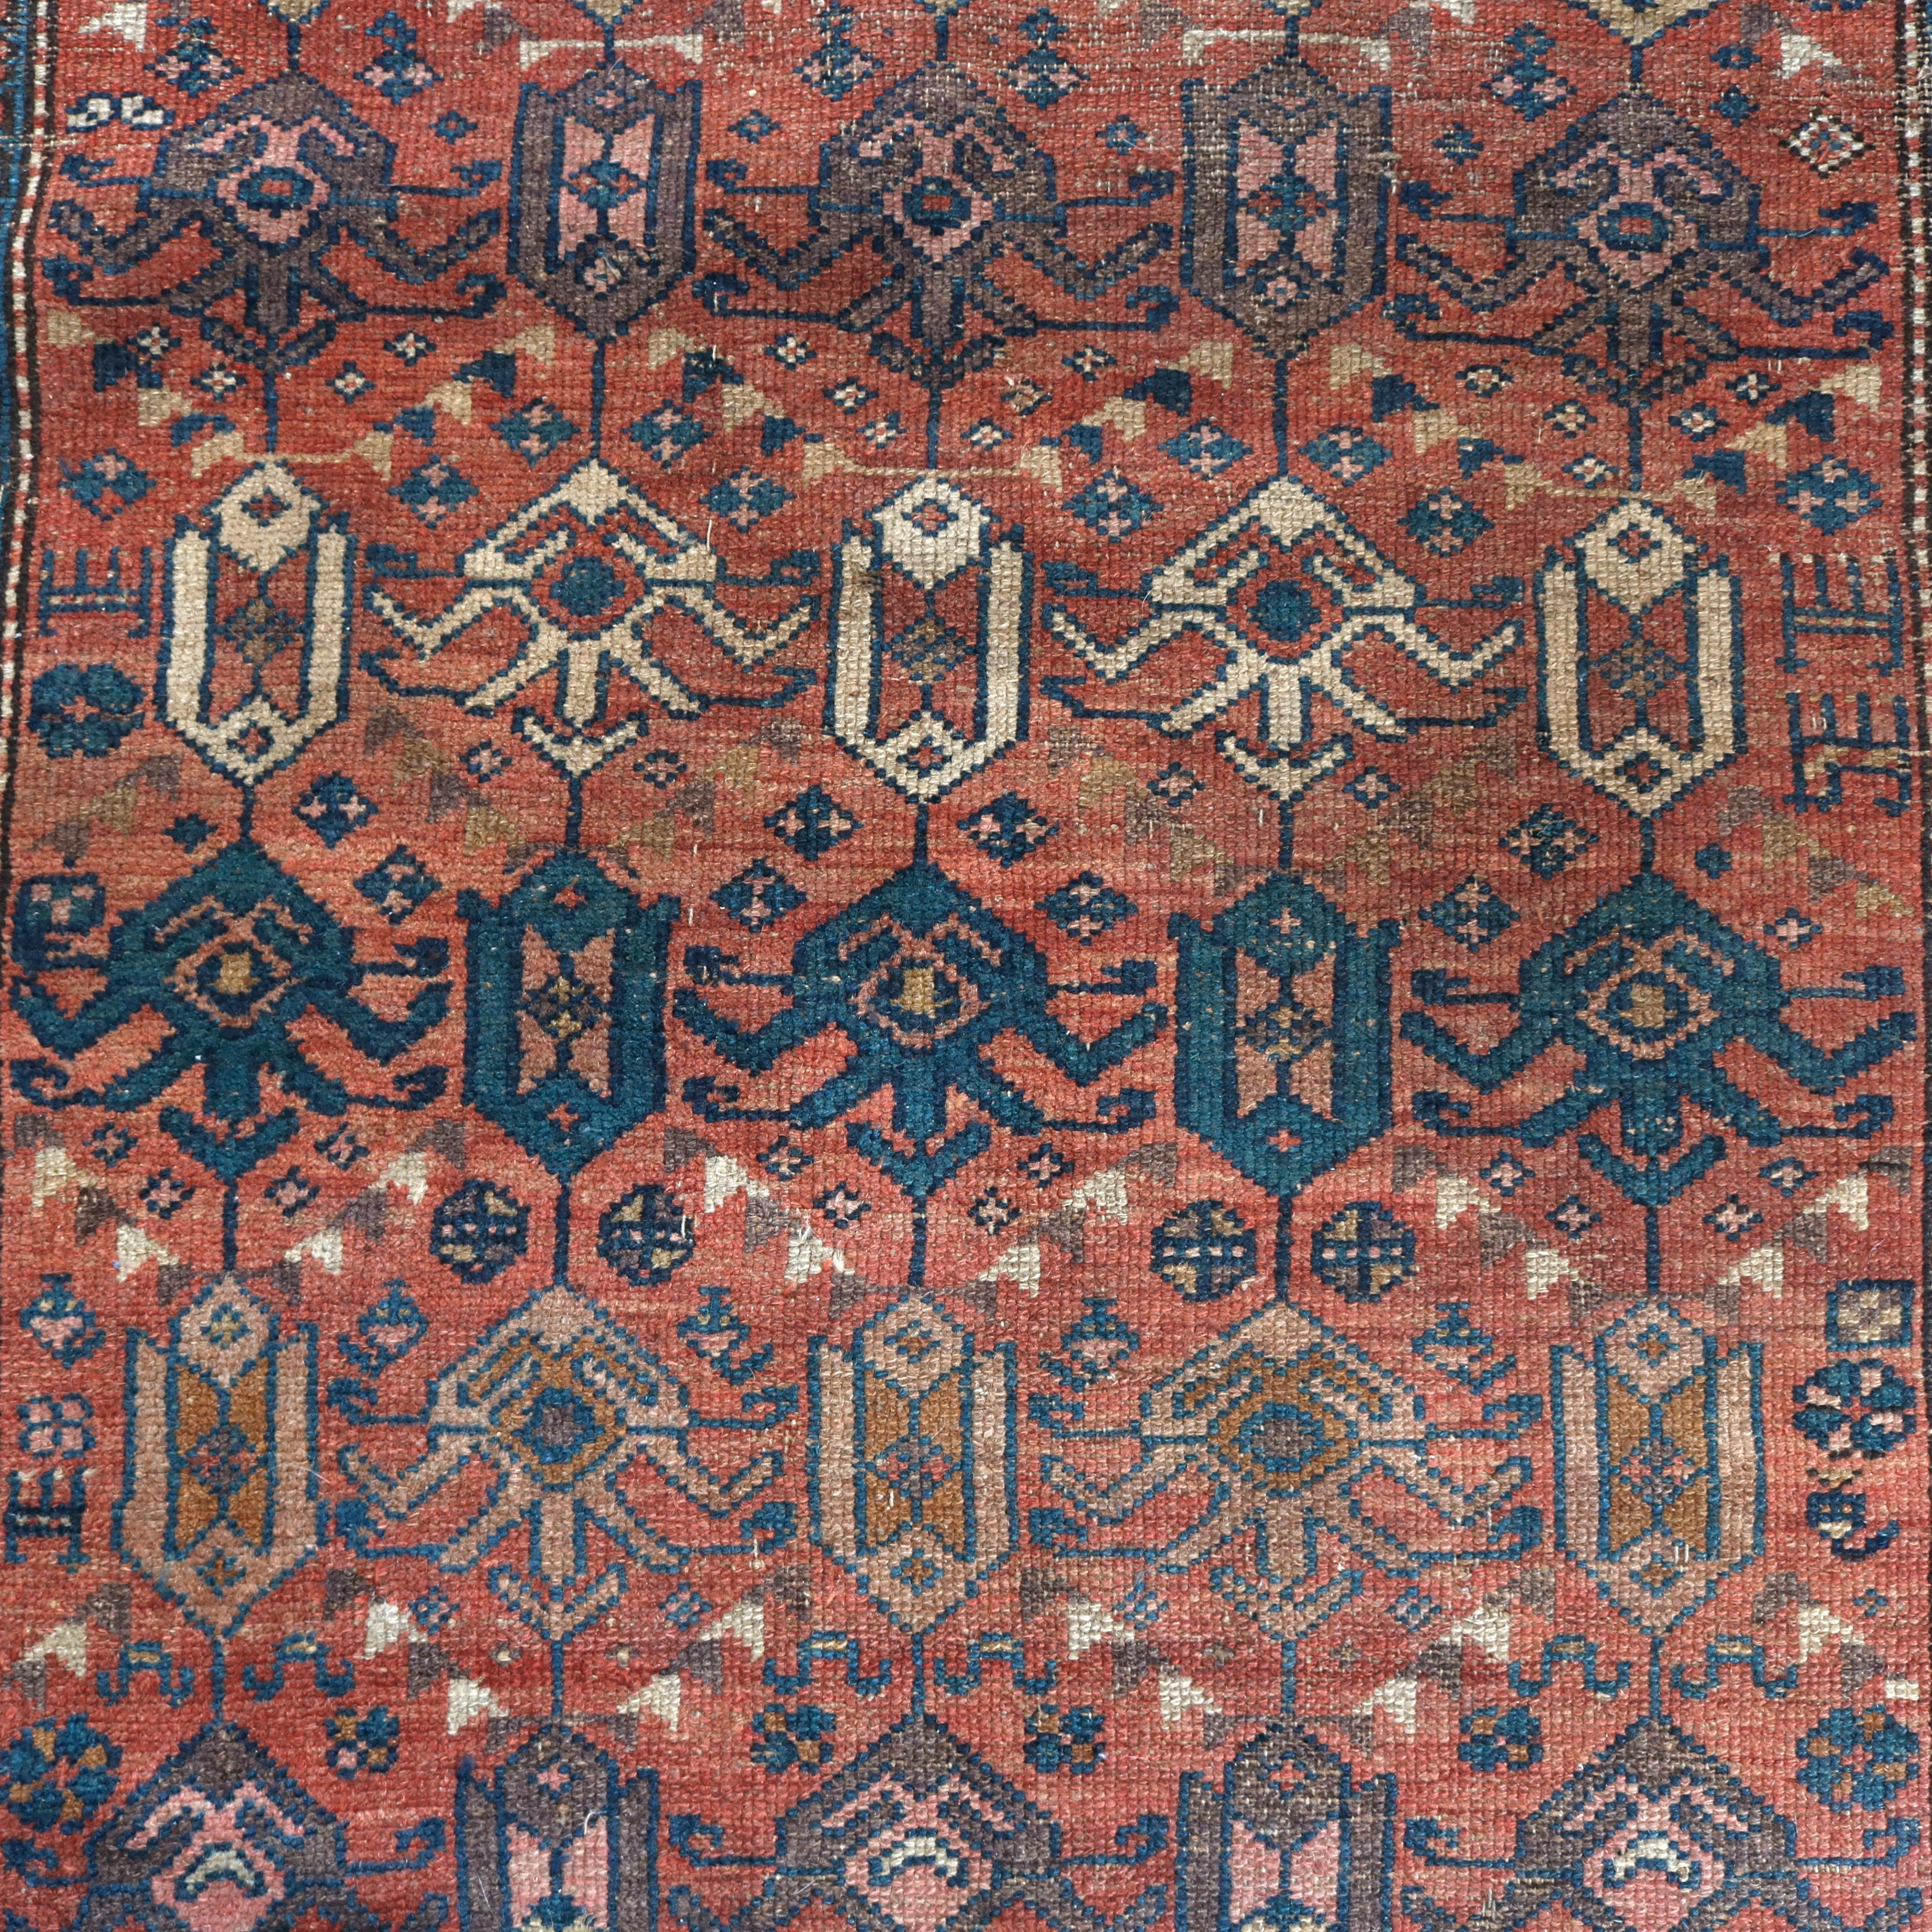 An antique Kurdish tribal oriental rug offers wool construction with all-over stylized design, circa 1920

Measures: 79